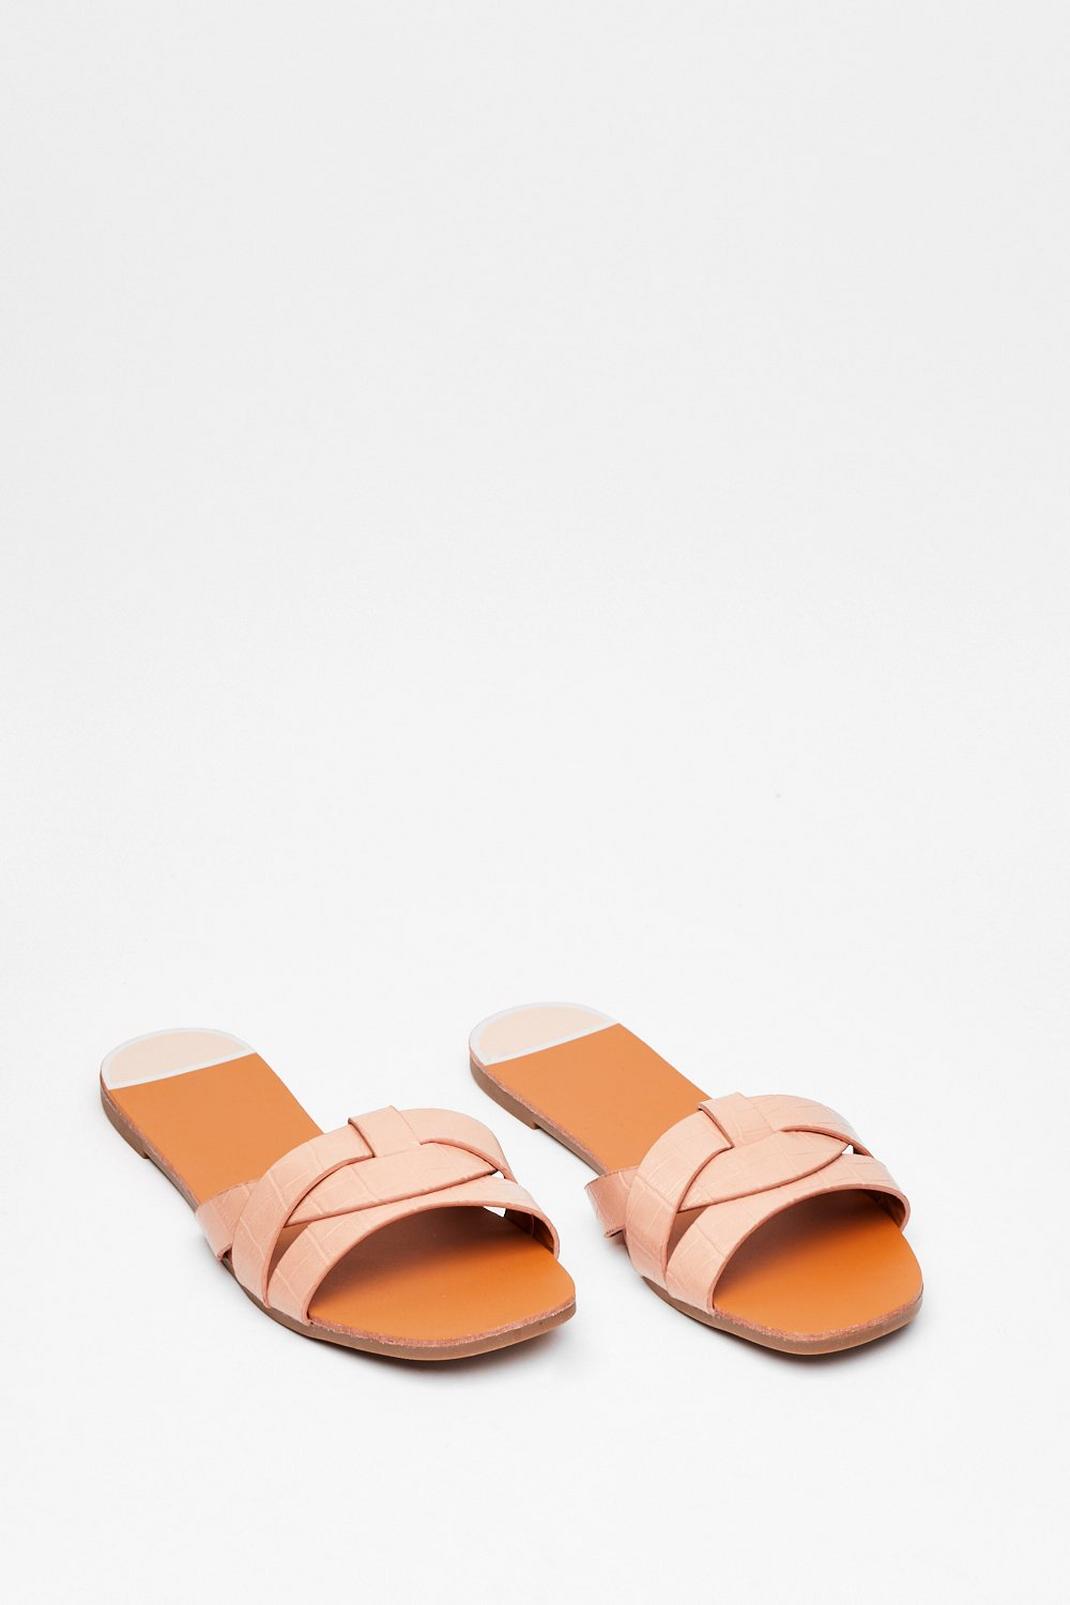 Croc This Time Faux Leather Flat Sandals | Nasty Gal